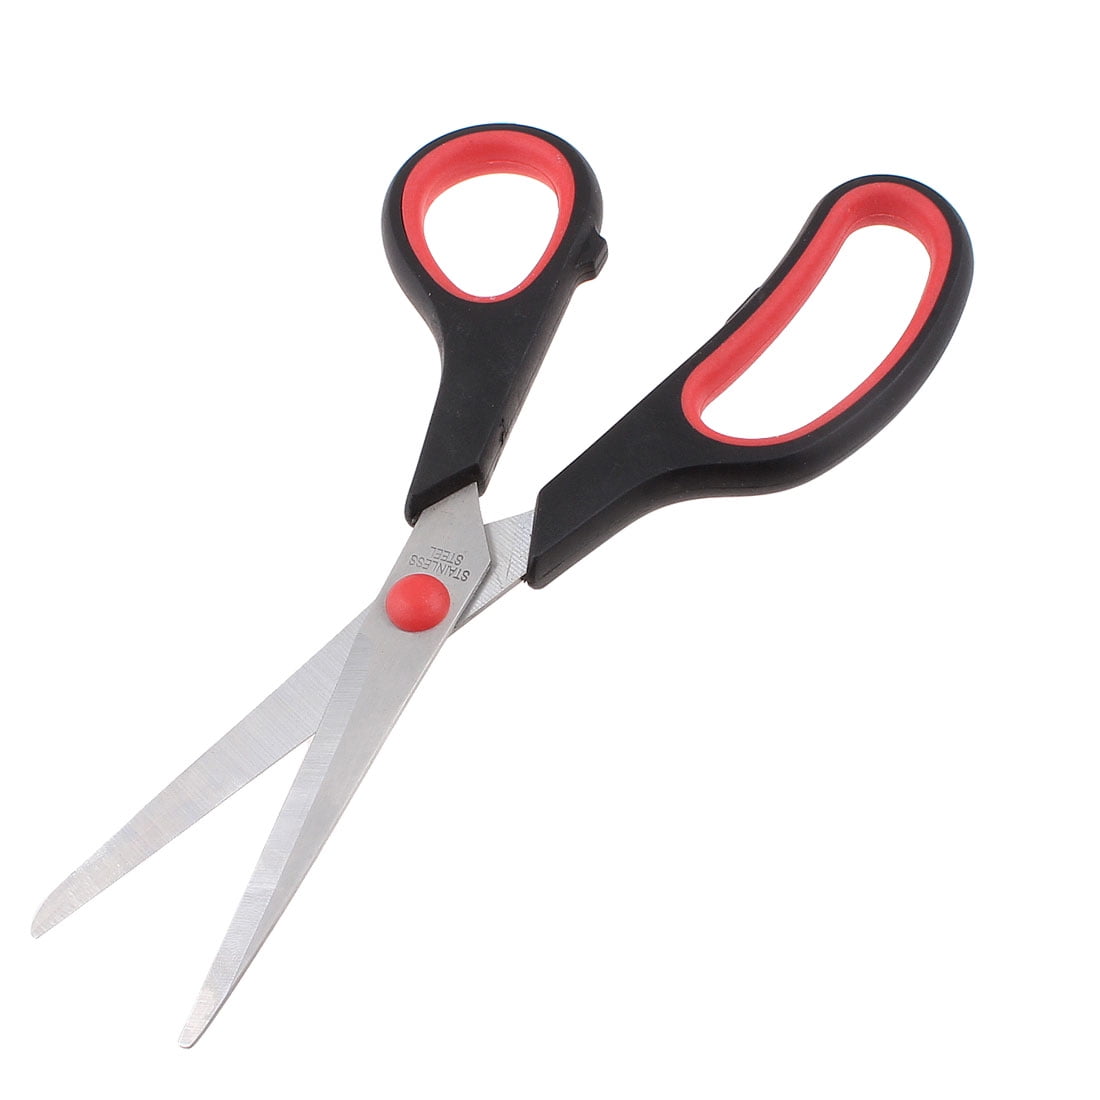 4 Long Blade Red Black Handle Paper Cutting Cutter Scissors Tool